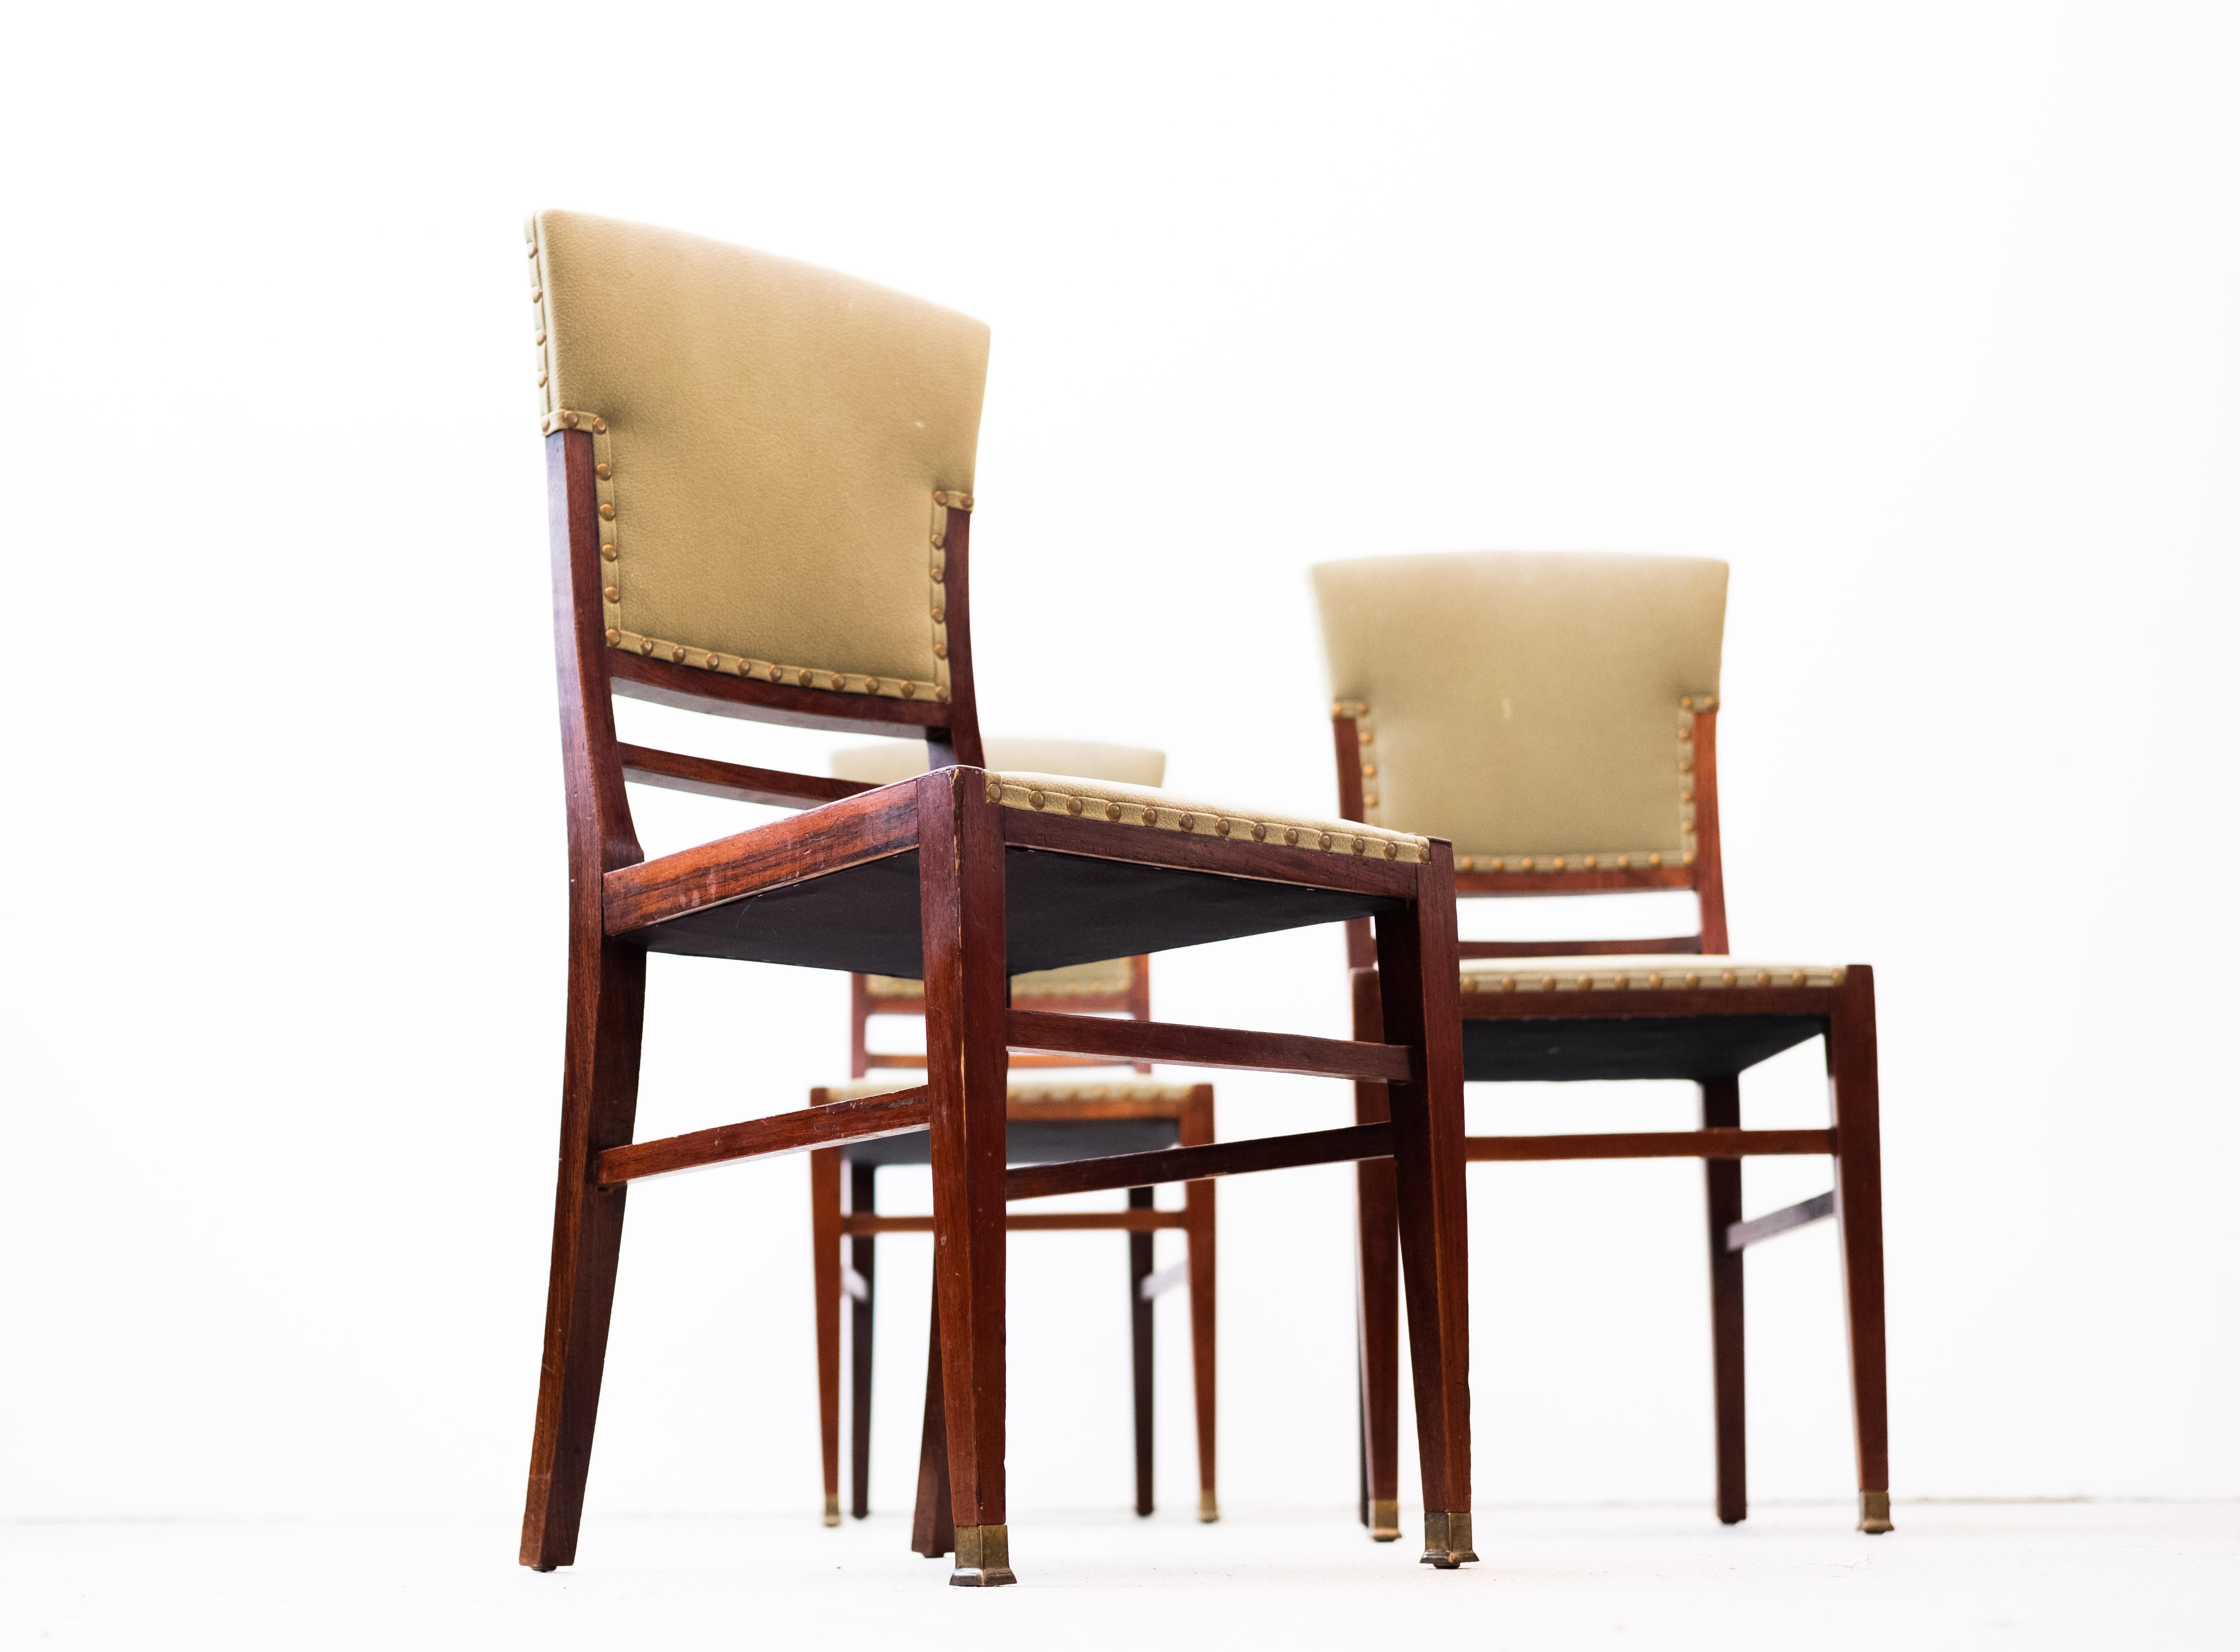 Early 20th Century Art Nouveau Diningroom-Chairs, Set of 6 (Vienna, 1910) For Sale